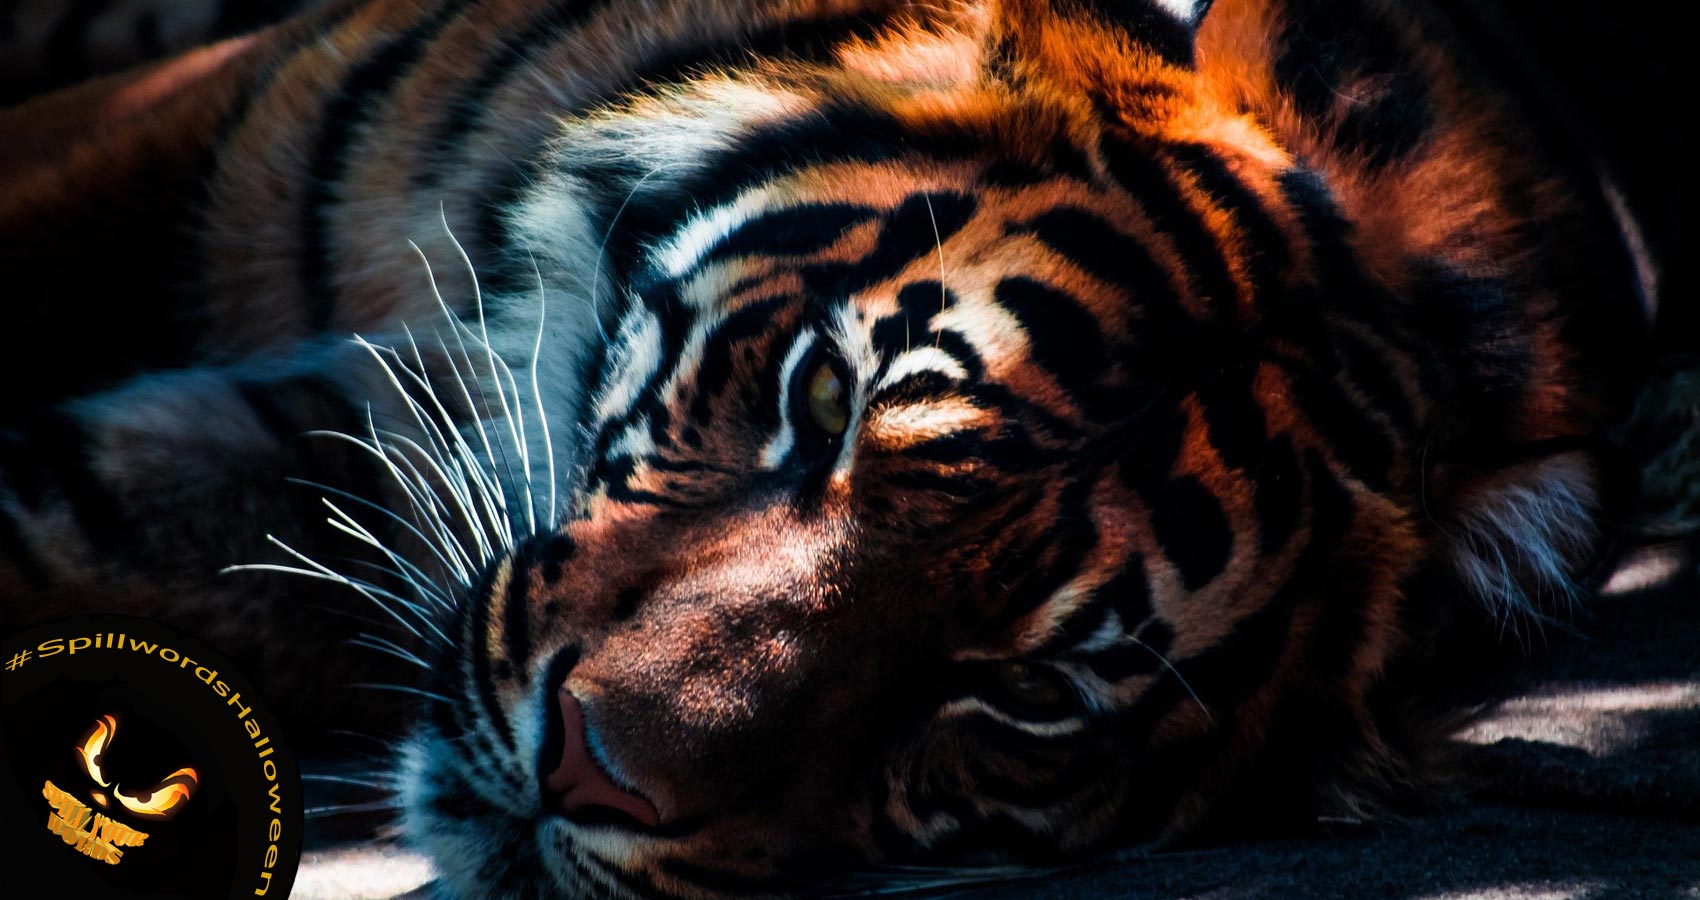 A Tiger In A Cage, poetry by Paula Puolakka at Spillwords.com